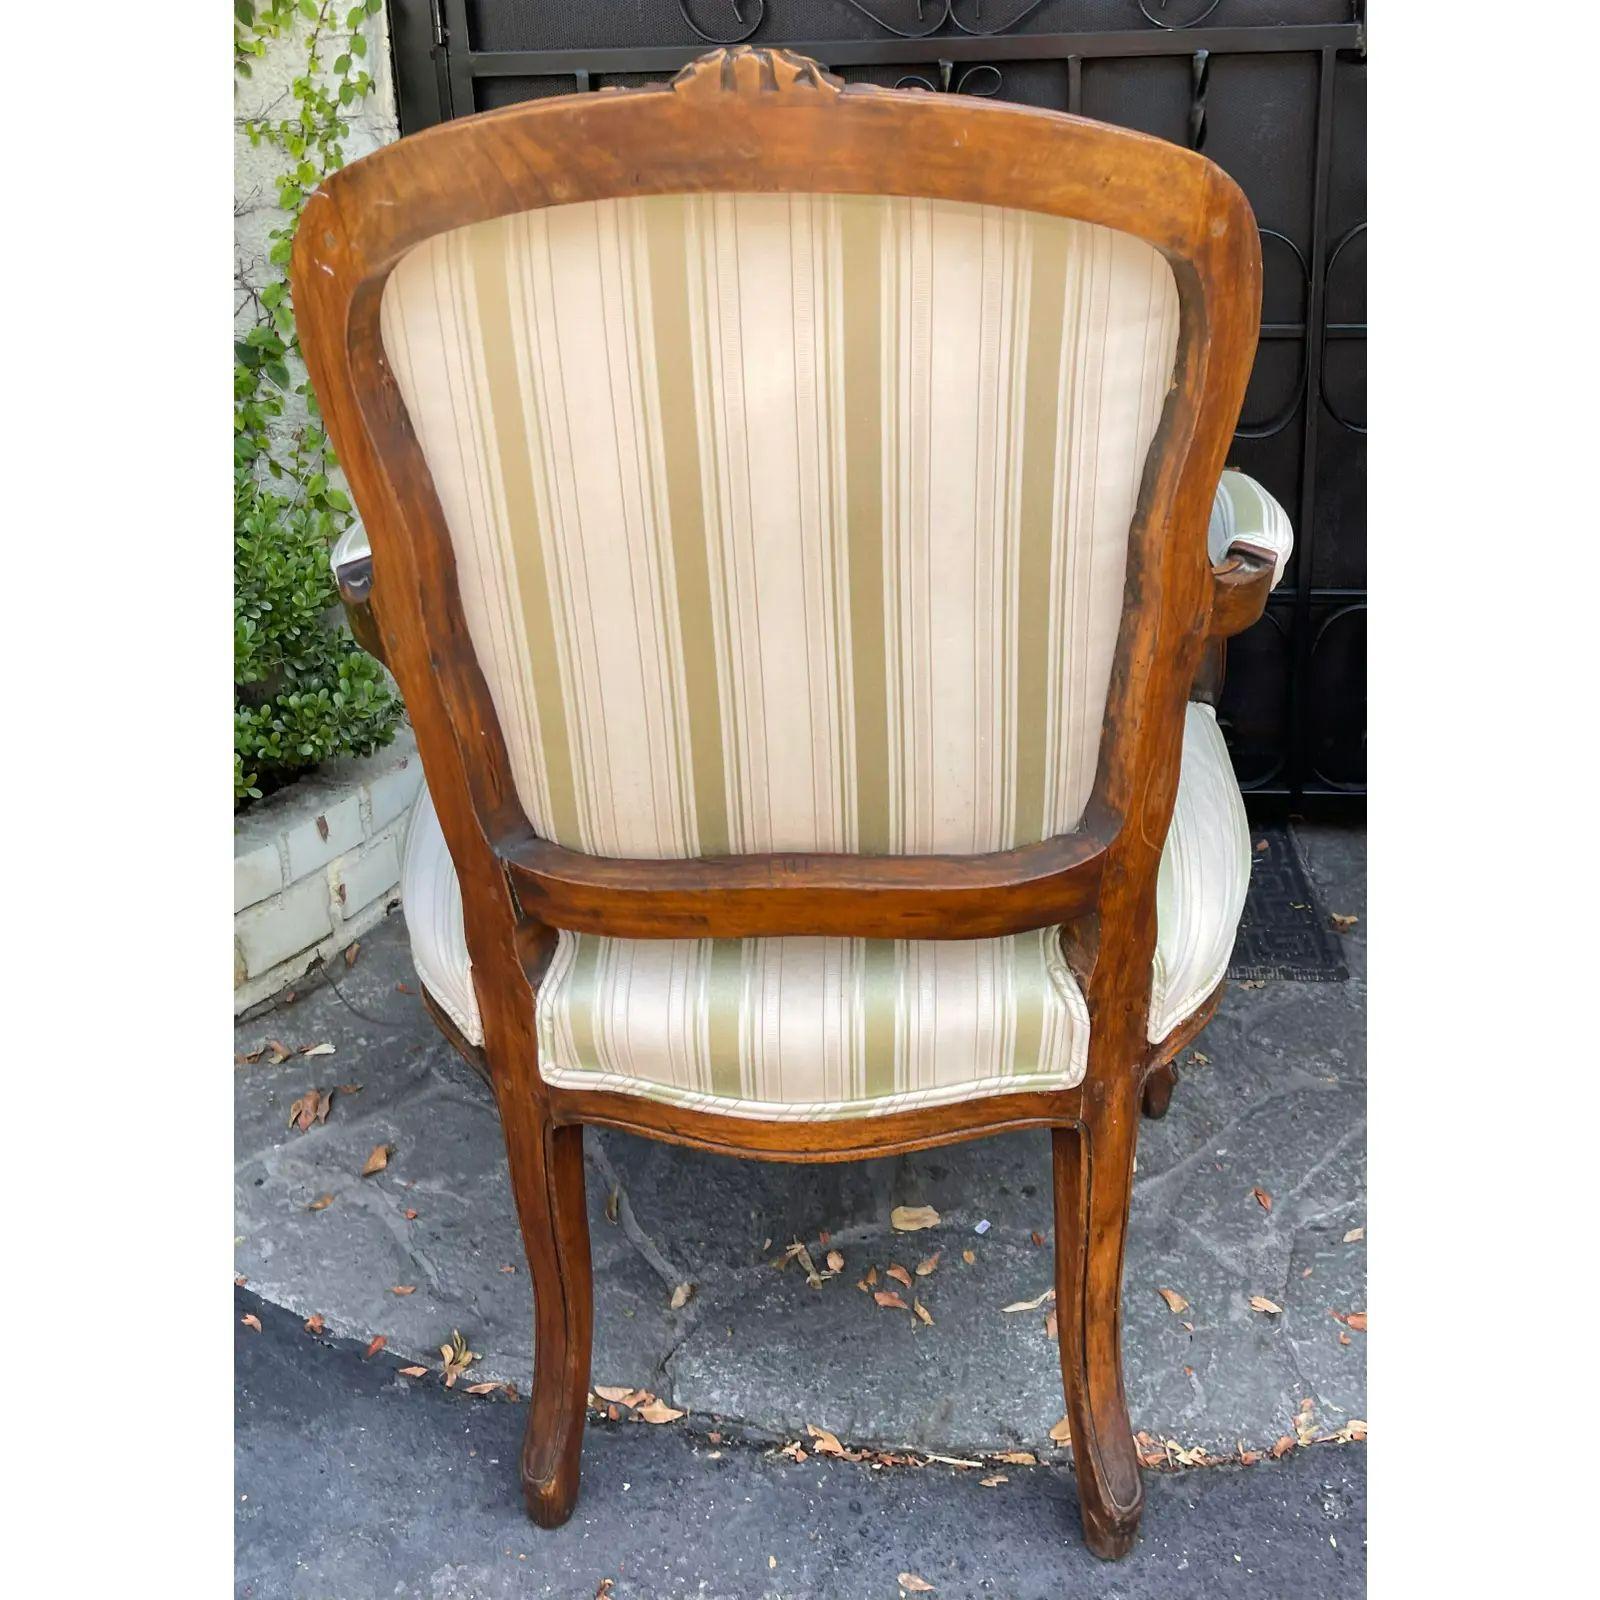 Antique French Provincial Carved Mahogany Fauteuil Arm Chair, 18th Century In Good Condition For Sale In LOS ANGELES, CA